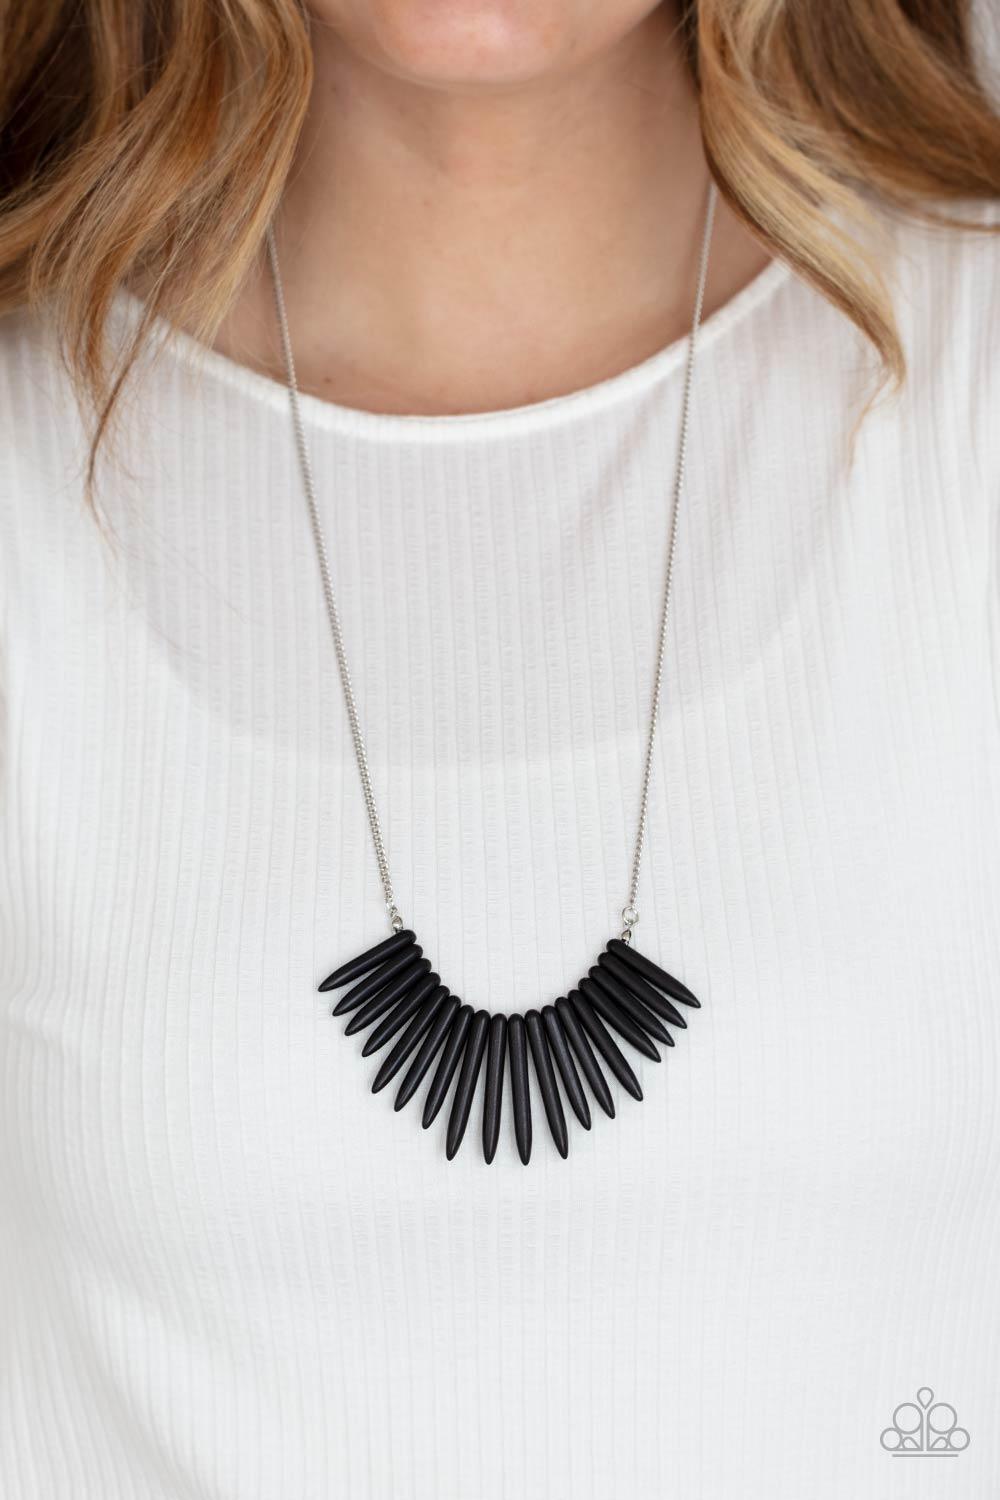 Paparazzi Accessories Exotic Edge - Black A daring fringe of black stone spikes in gradually decreasing sizes flares out below the collar for an exotic and edgy effect. Features an adjustable clasp closure. Sold as one individual necklace. Includes one pa